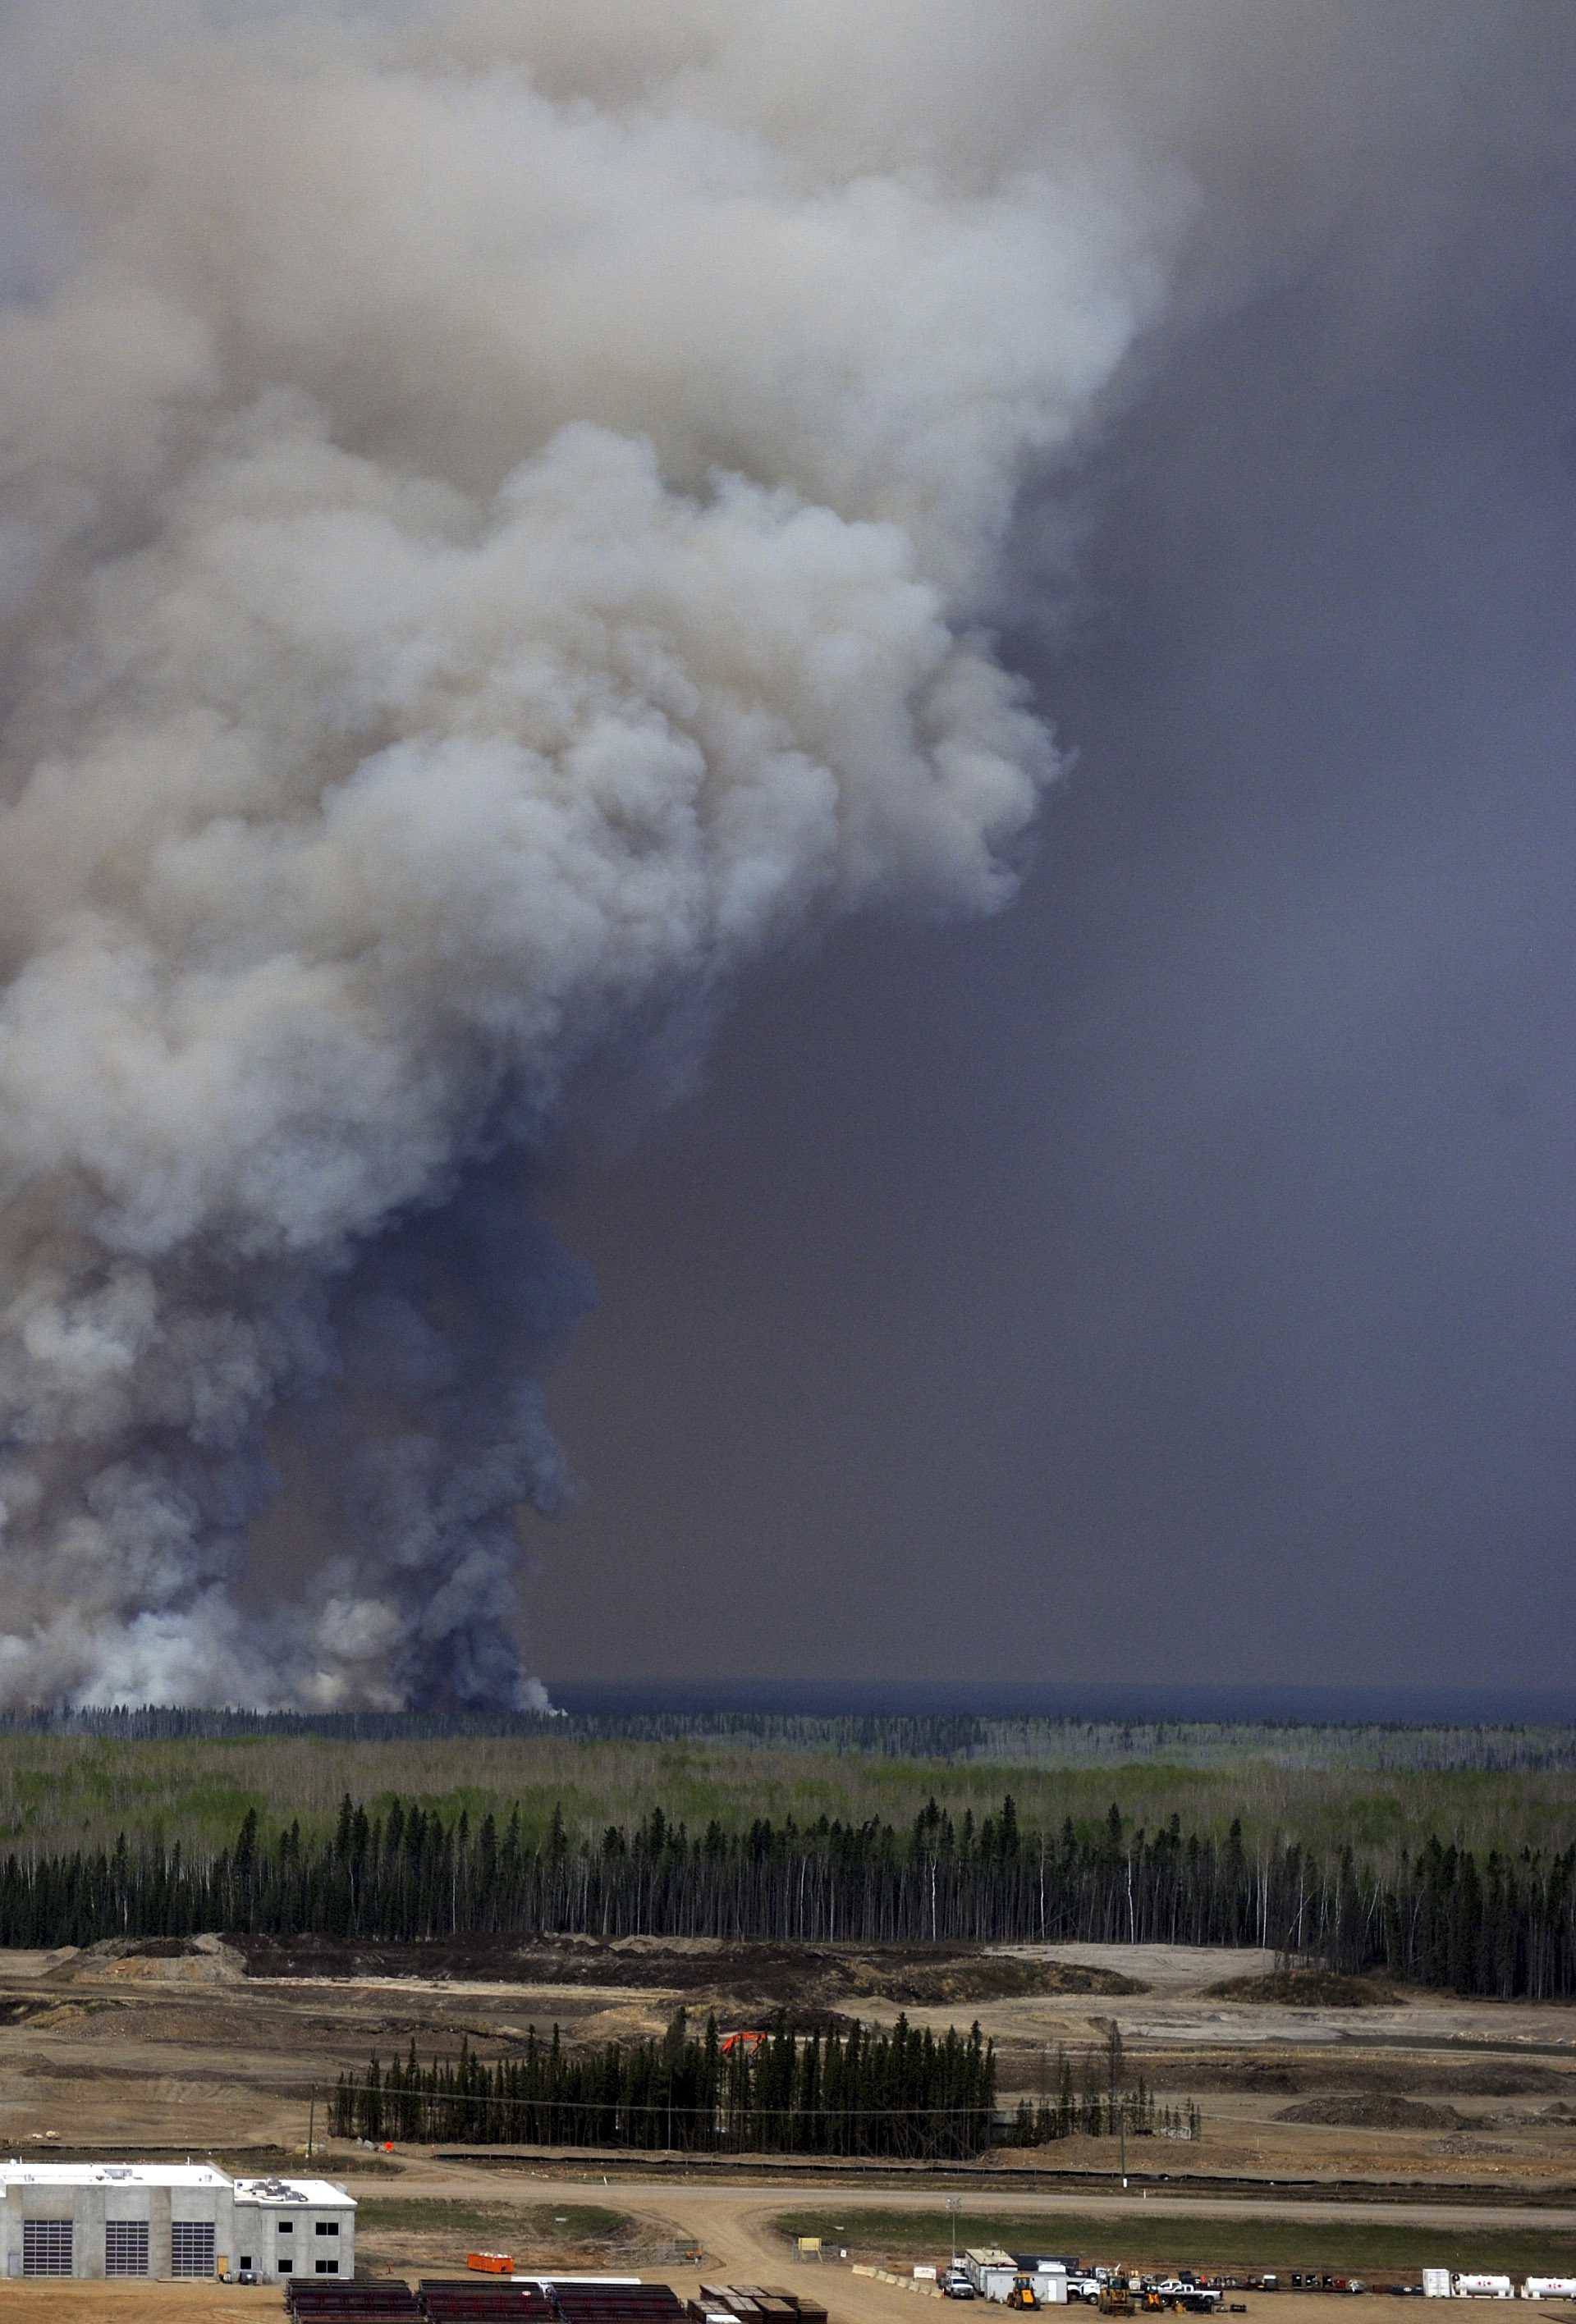 A Canadian Joint Operations Command aerial photo shows wildfires near neighborhoods in Fort McMurray Alberta Canada